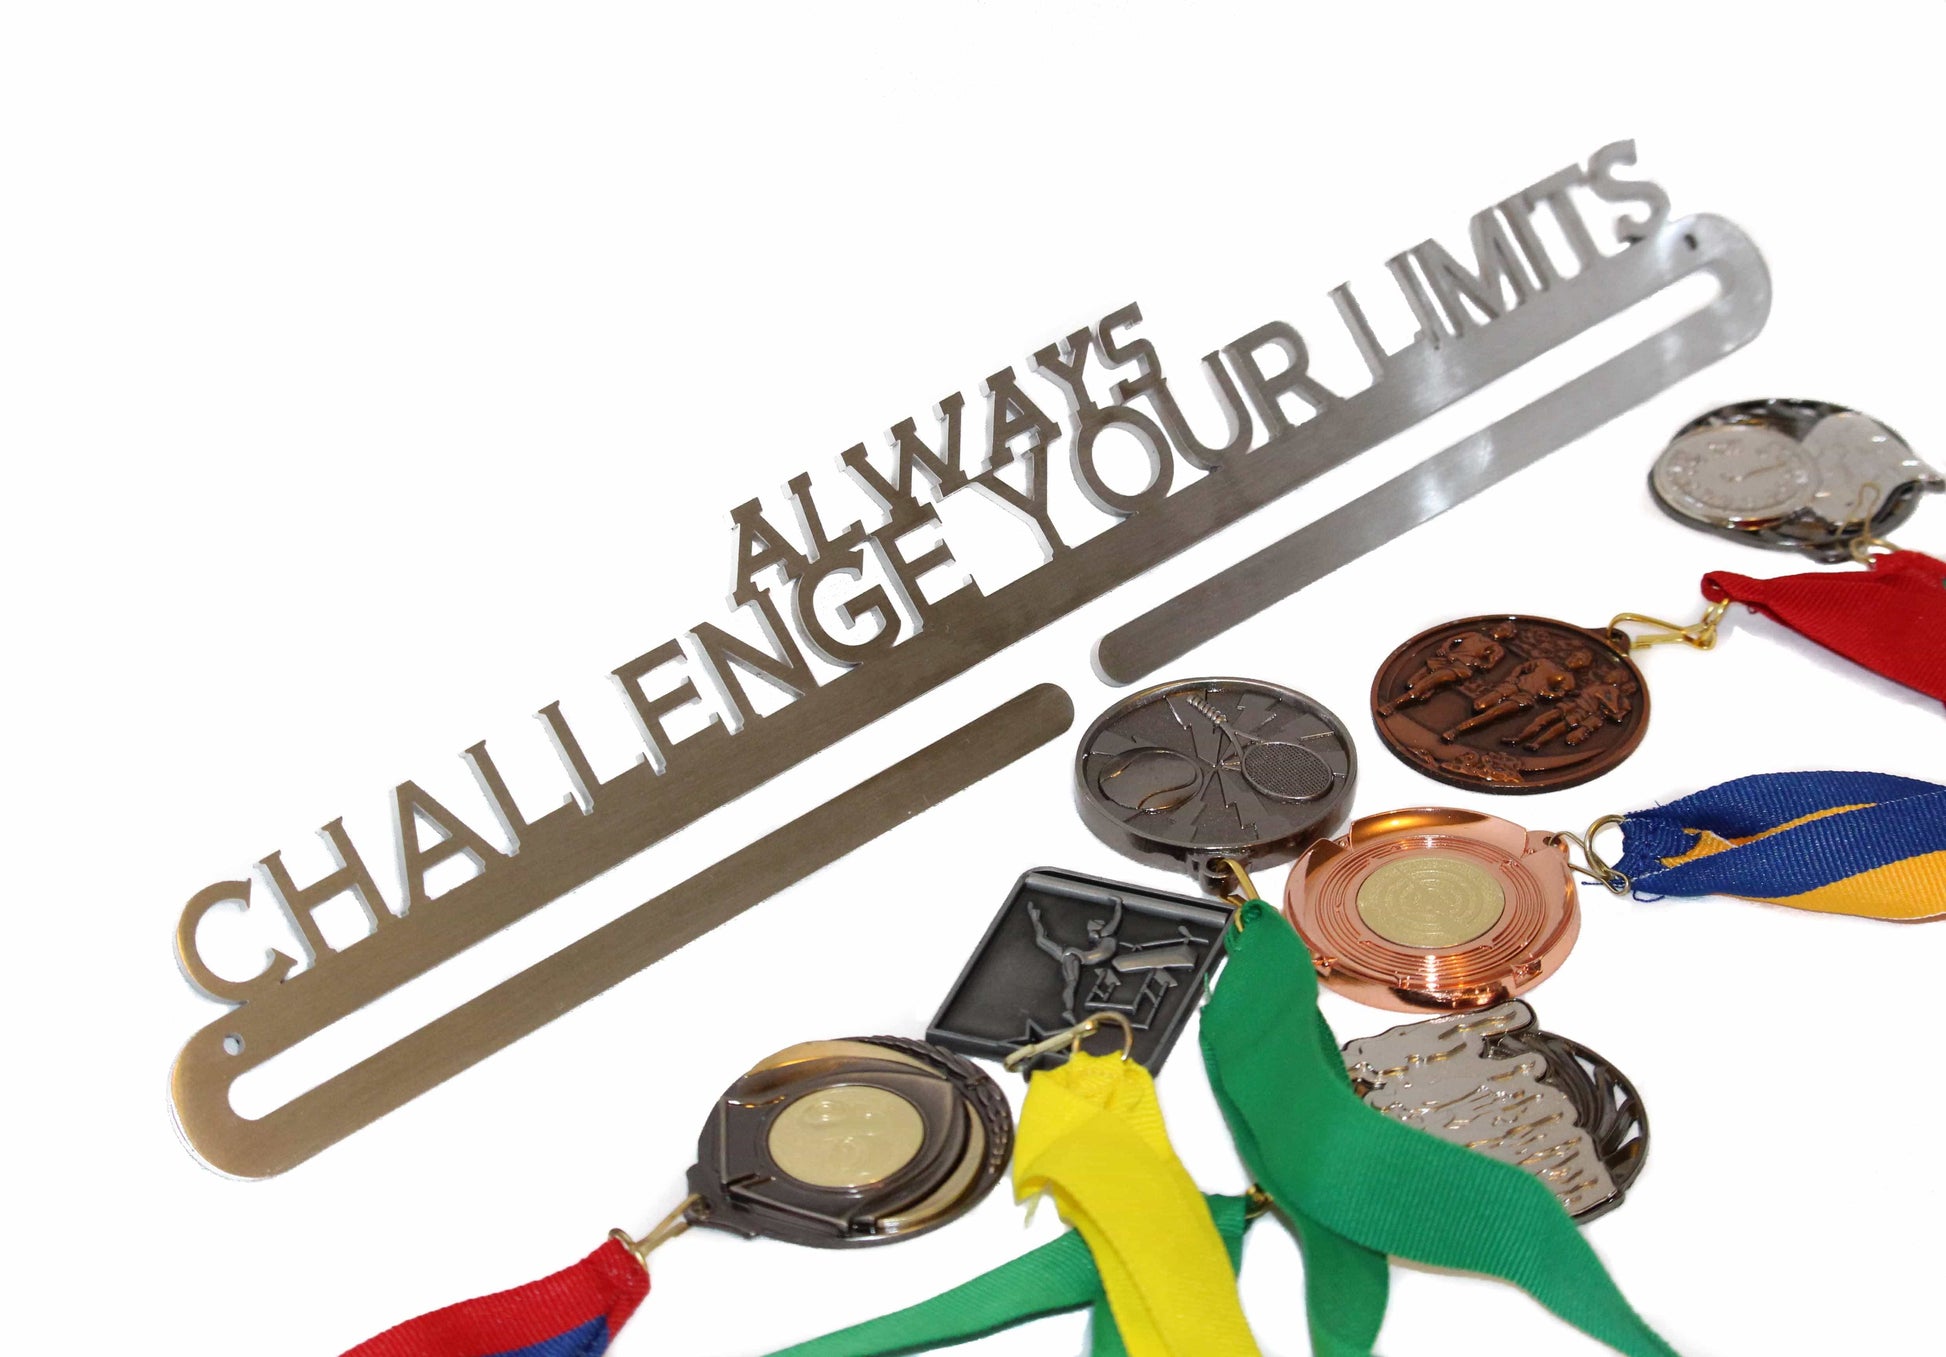 MEDAL AND RIBBON HANGER - ALWAYS CHALLENGE YOUR LIMITS **FREE SHIPPING IN AUSTRALIA** - Australian Custom Metalwork Designs